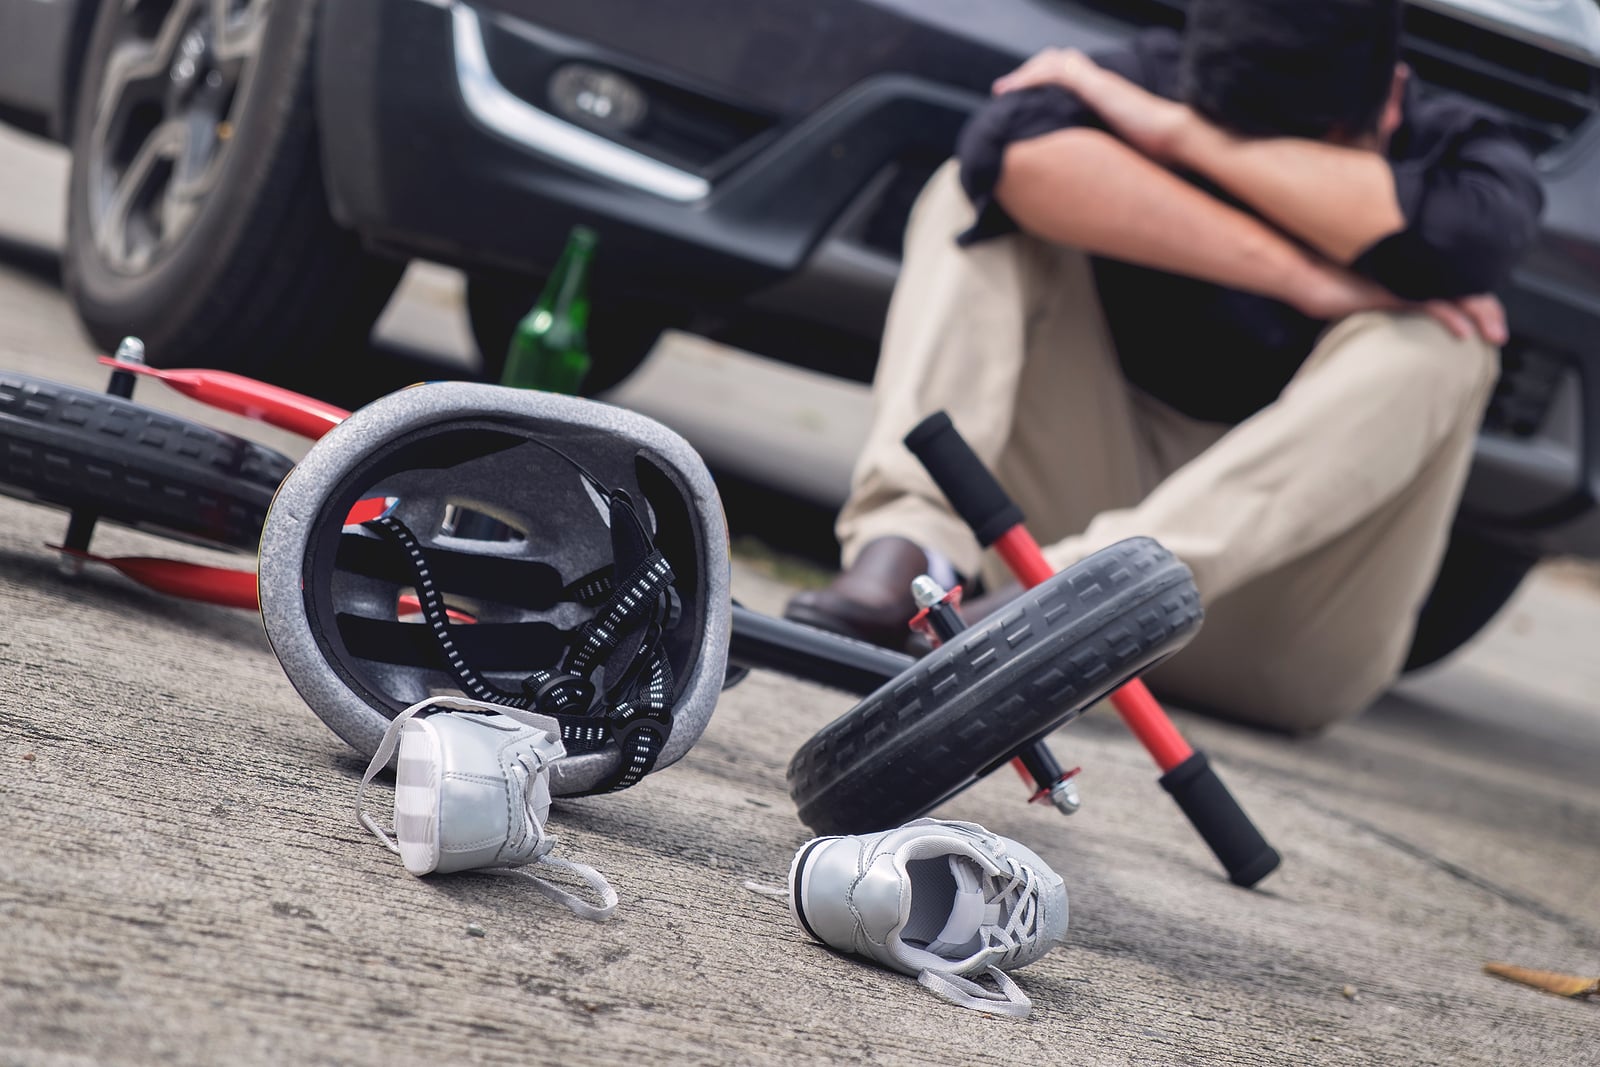 How Can Victims of DUI Accidents Enhance Their Claims Against At-Fault Drivers?